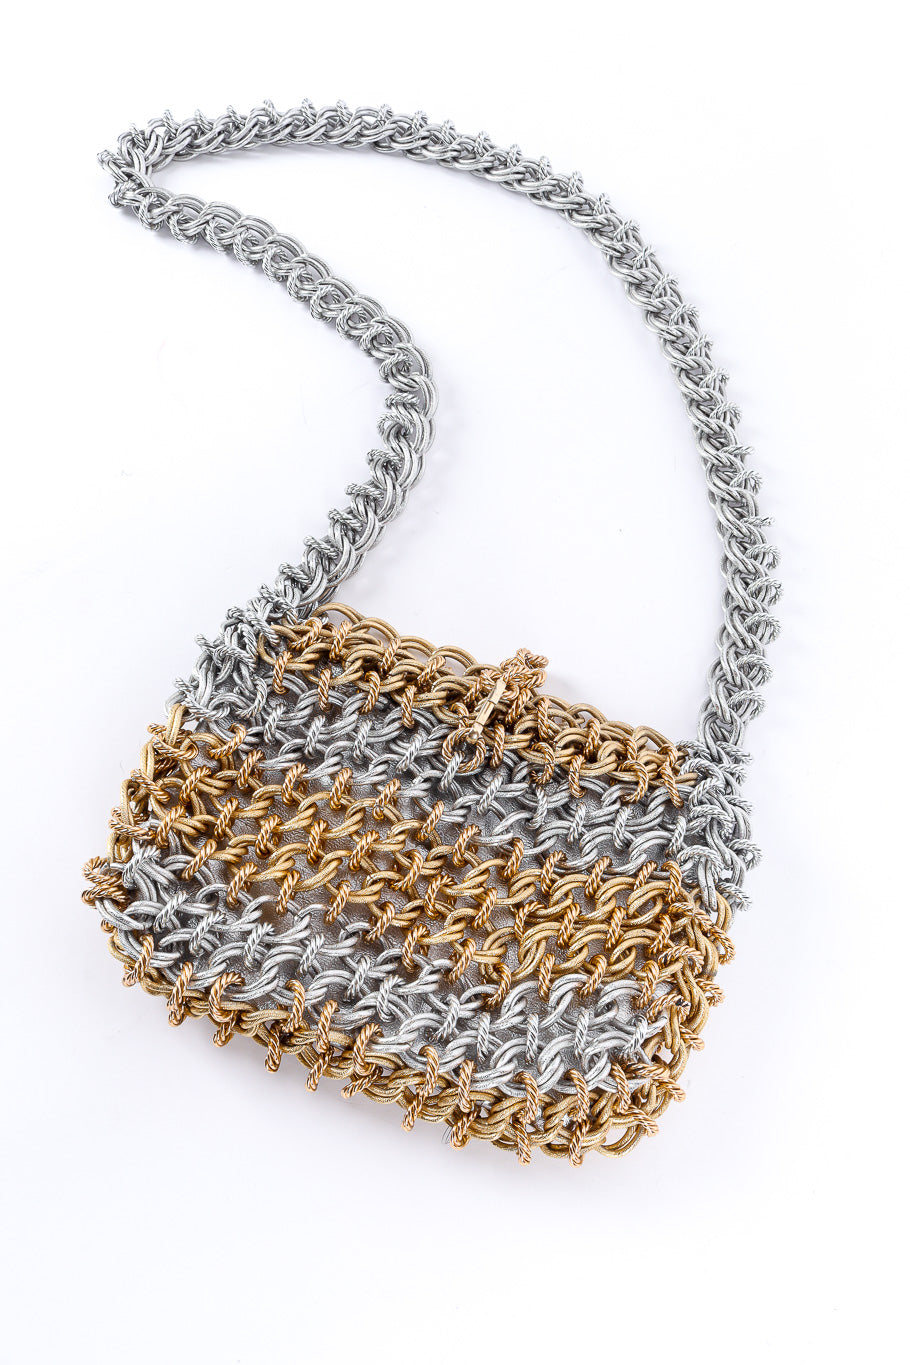 Chainlink shoulder bag by Raoul Calabro flat lay @recessla